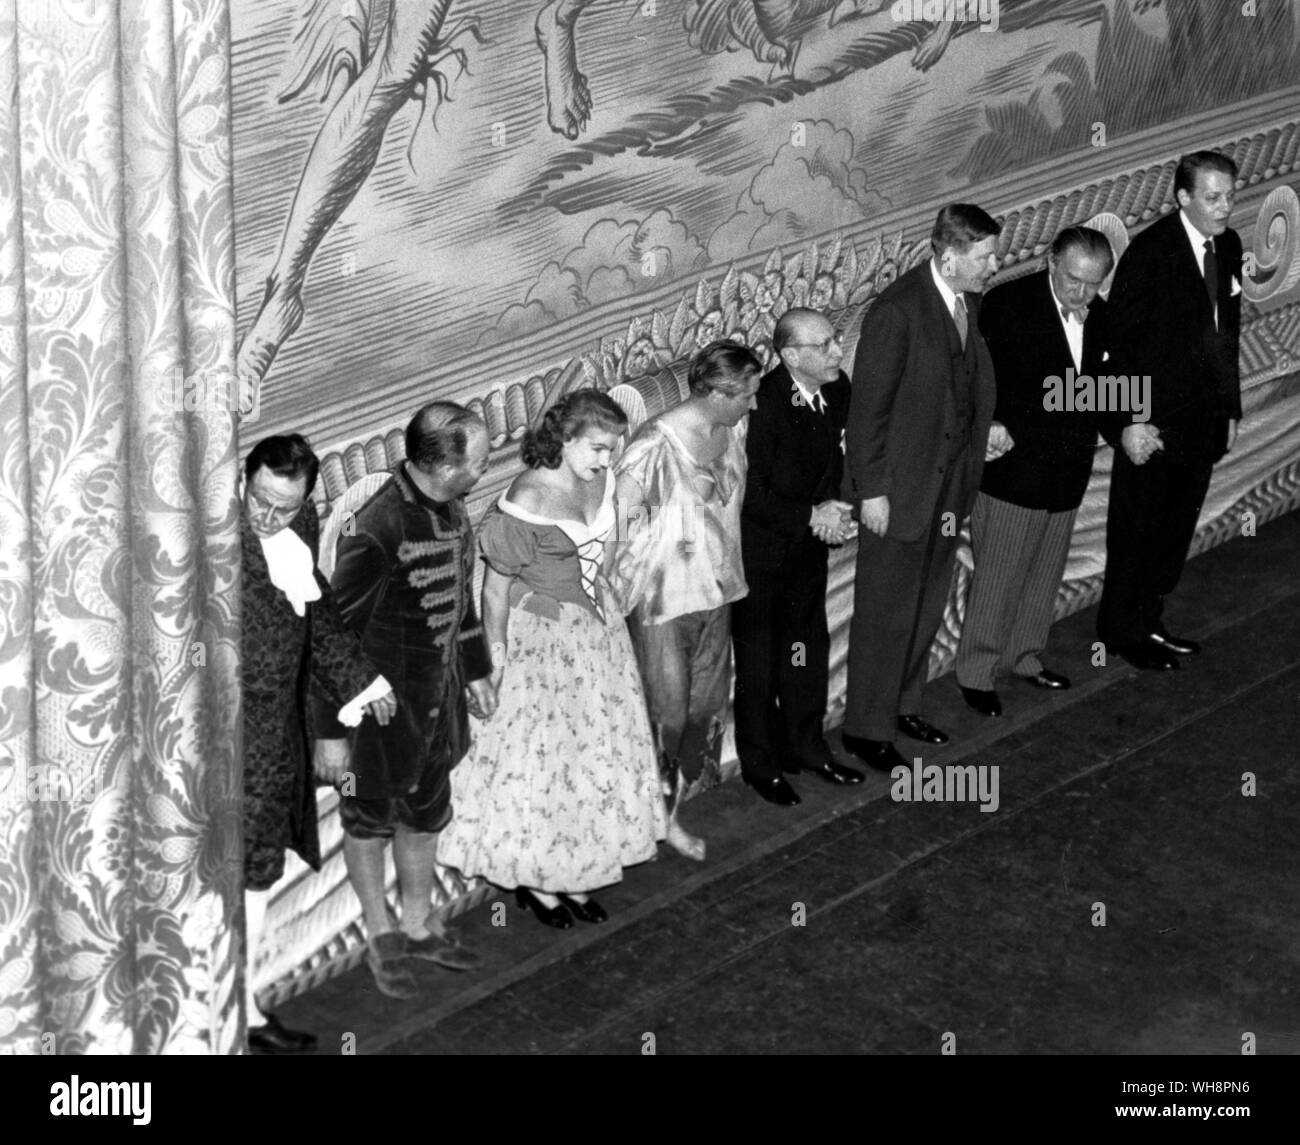 The first American performance of The Rake's Progress at the Metropolitan Opera, New York 1953 from left to right Norman Scott (Trulove) Mack Harrell (Nick Shadow) Hilde Guden (Anne) Eugene Conley (Tom) Stravinsky, Auden, Fritz Reiner (the conductor) and Kallman Stock Photo